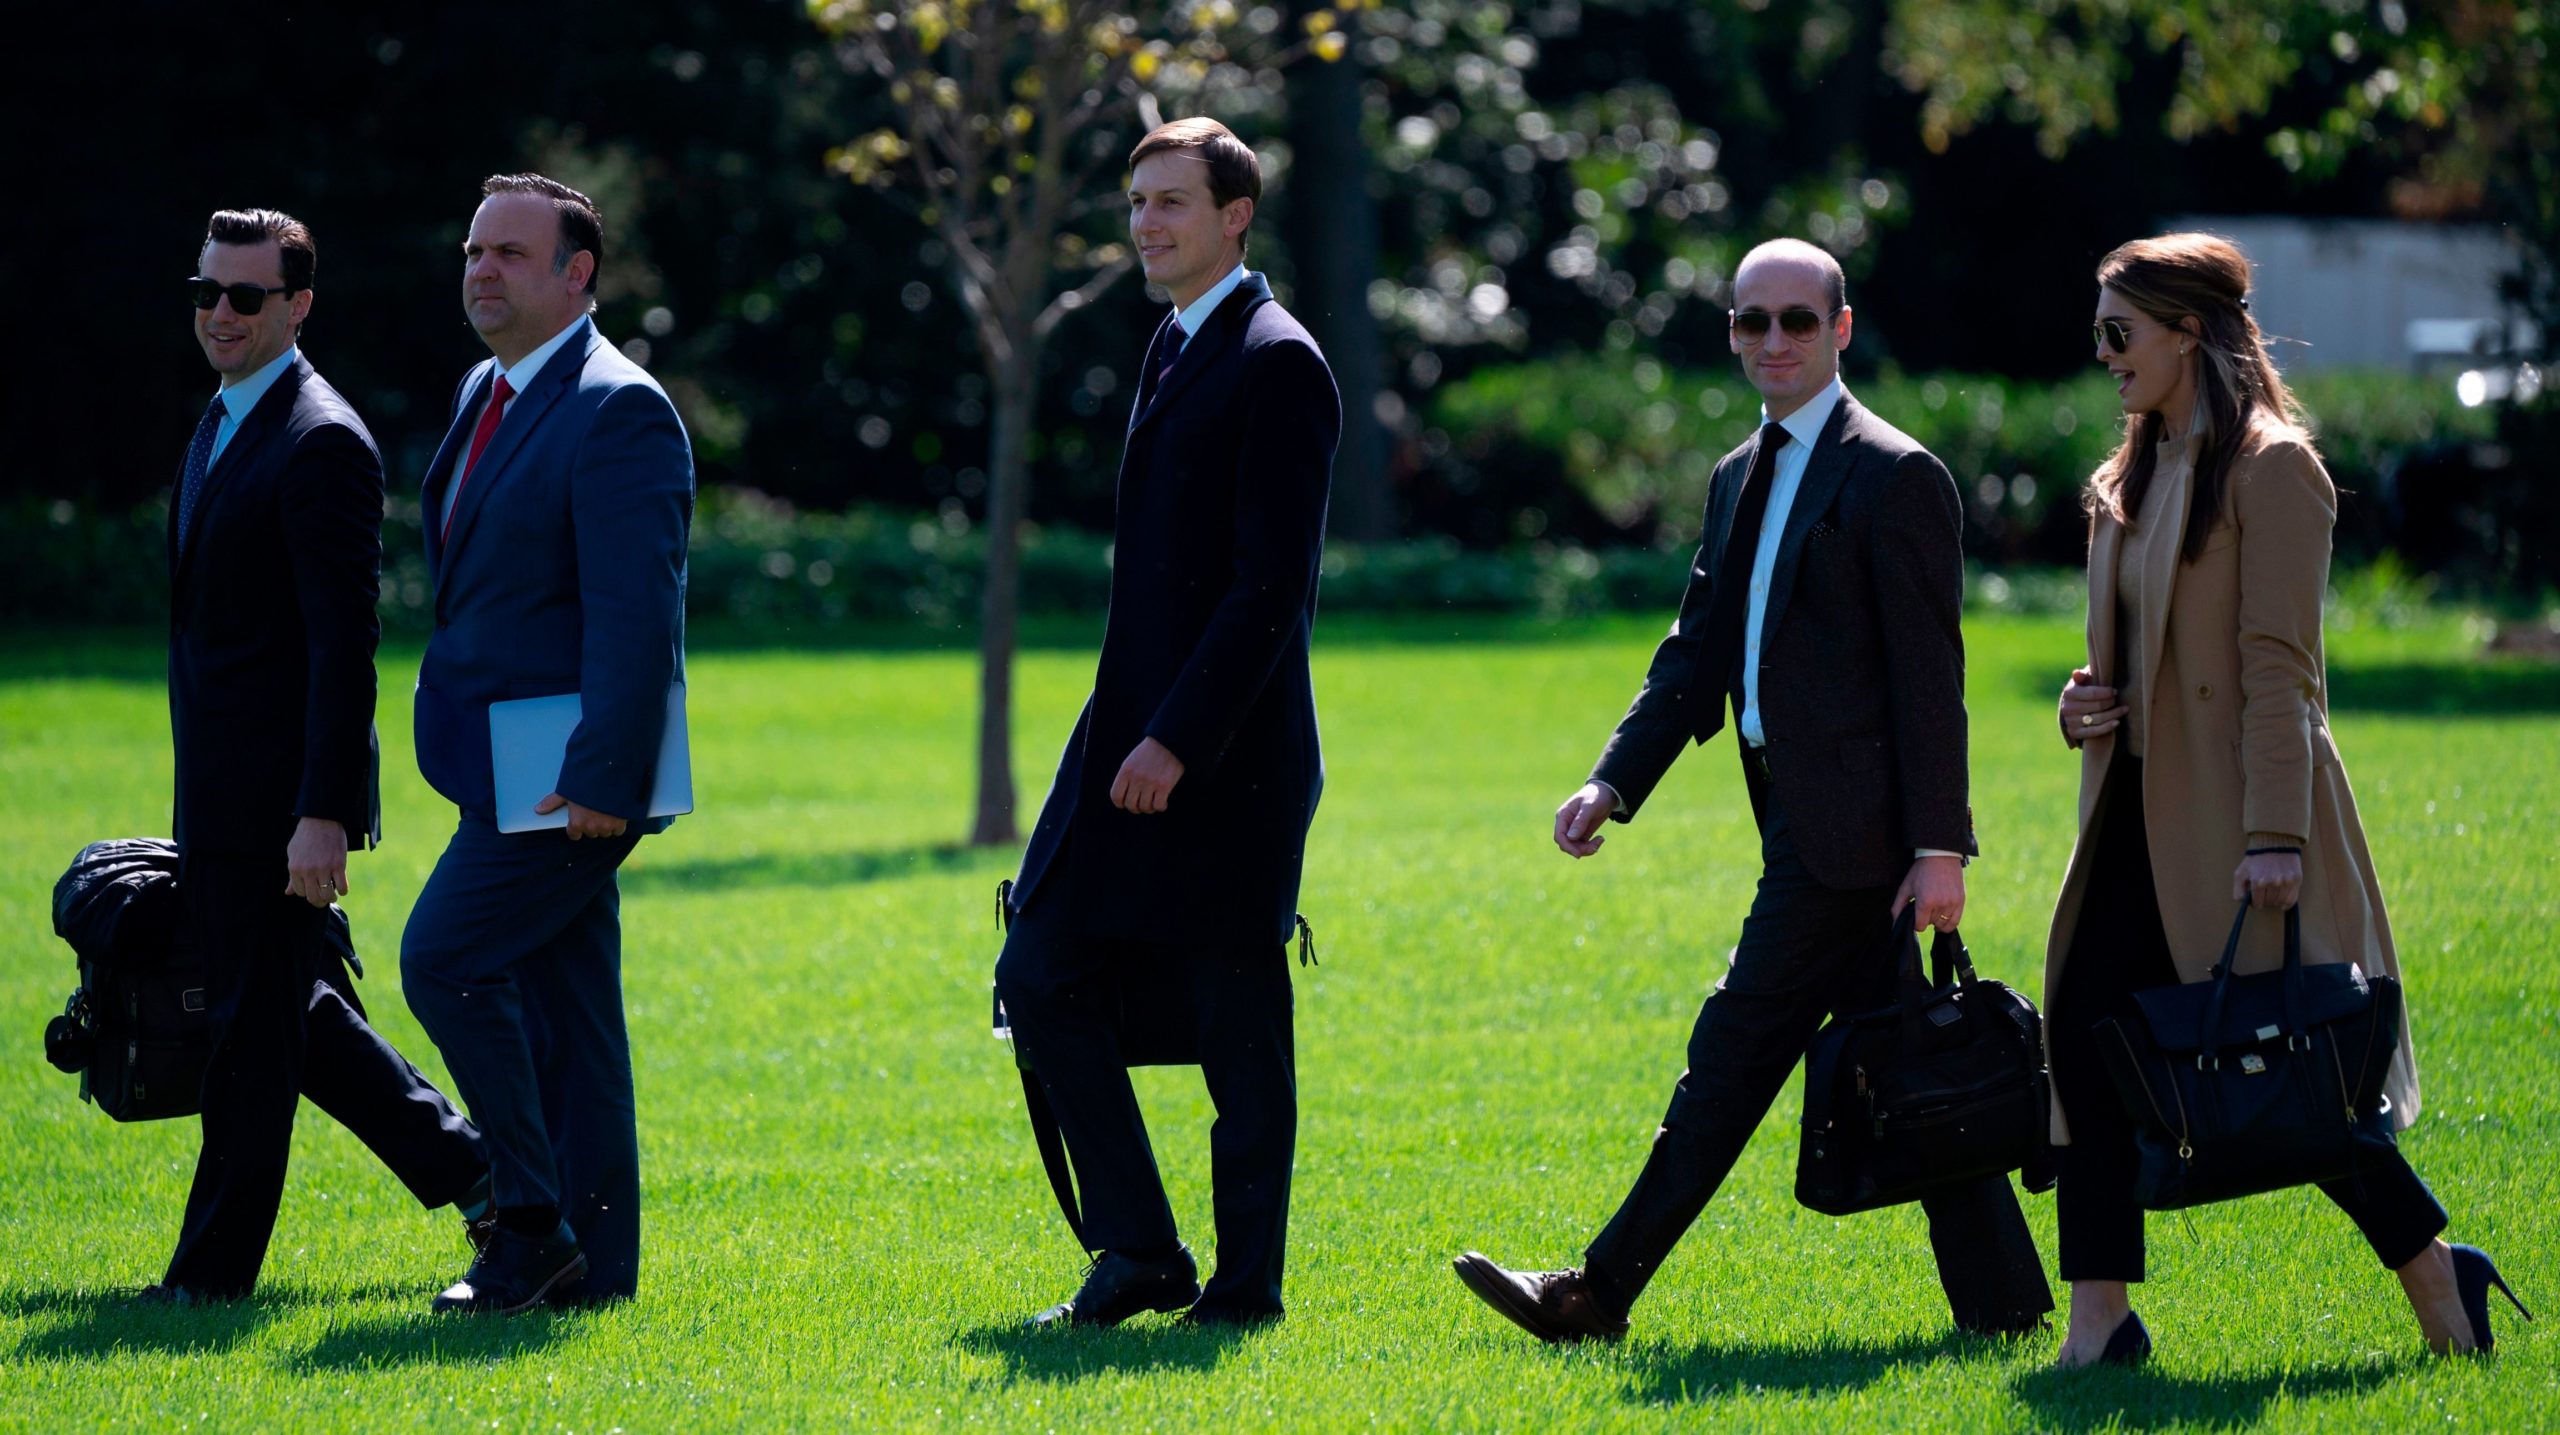 Left to the right: Director of Oval Office Operations Nicholas Luna, Deputy Chief of Staff for Communications Dan Scavino, senior adviser Jared Kushner, senior adviser Stephen Miller, and counselor to the president Hope Hicks. (Photo: Andrew Caballero-Reynolds/AFP, Getty Images)